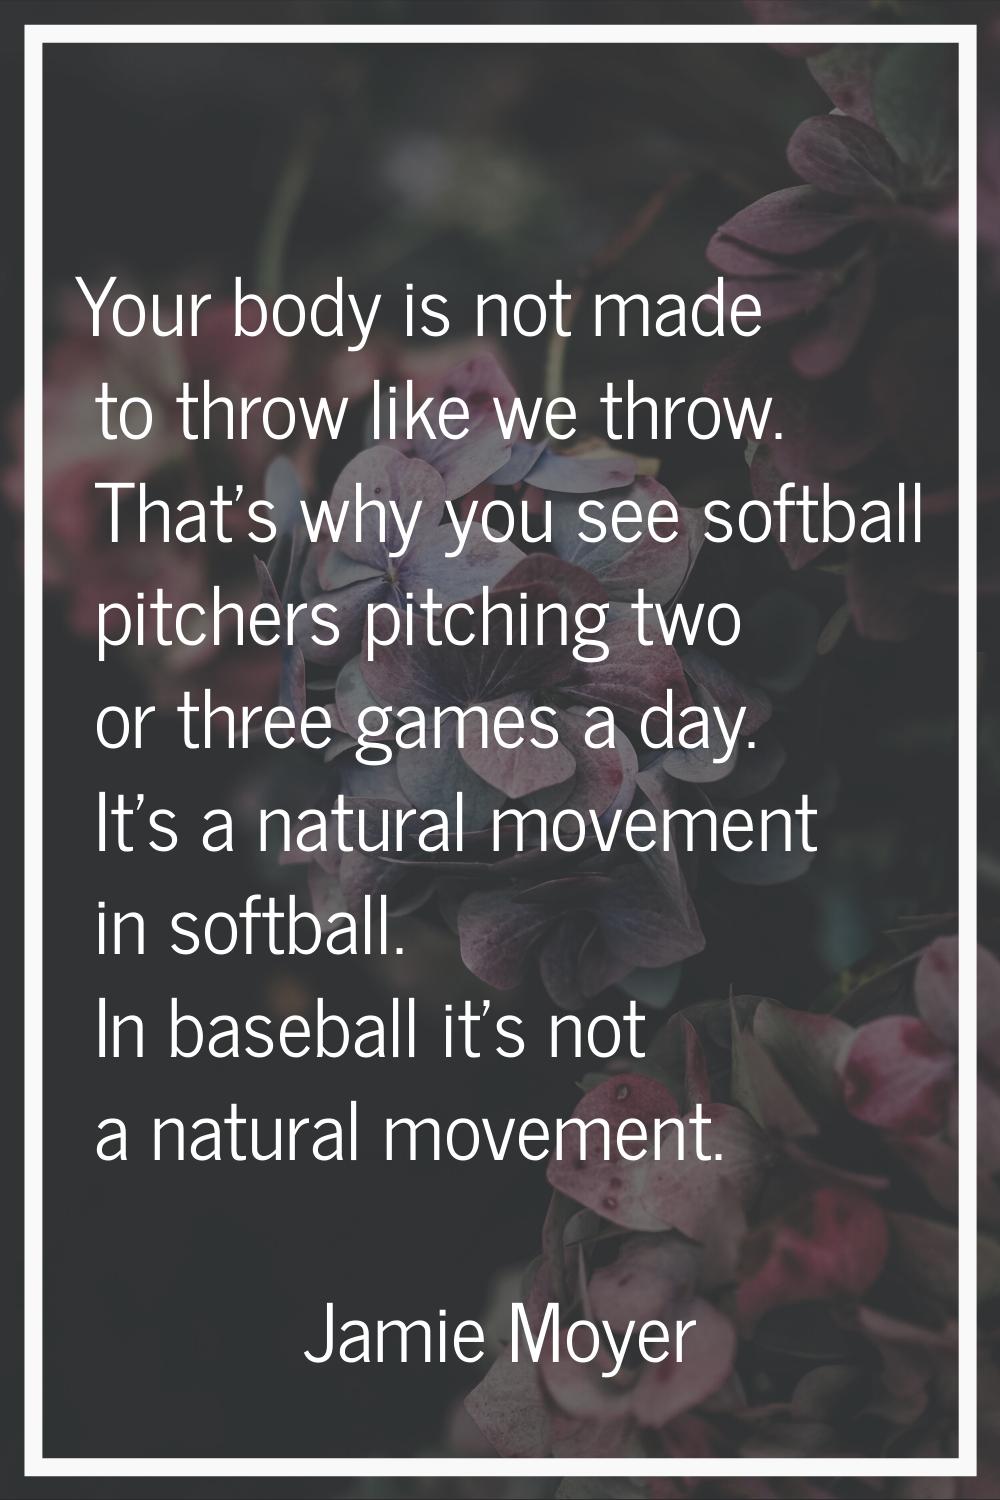 Your body is not made to throw like we throw. That's why you see softball pitchers pitching two or 